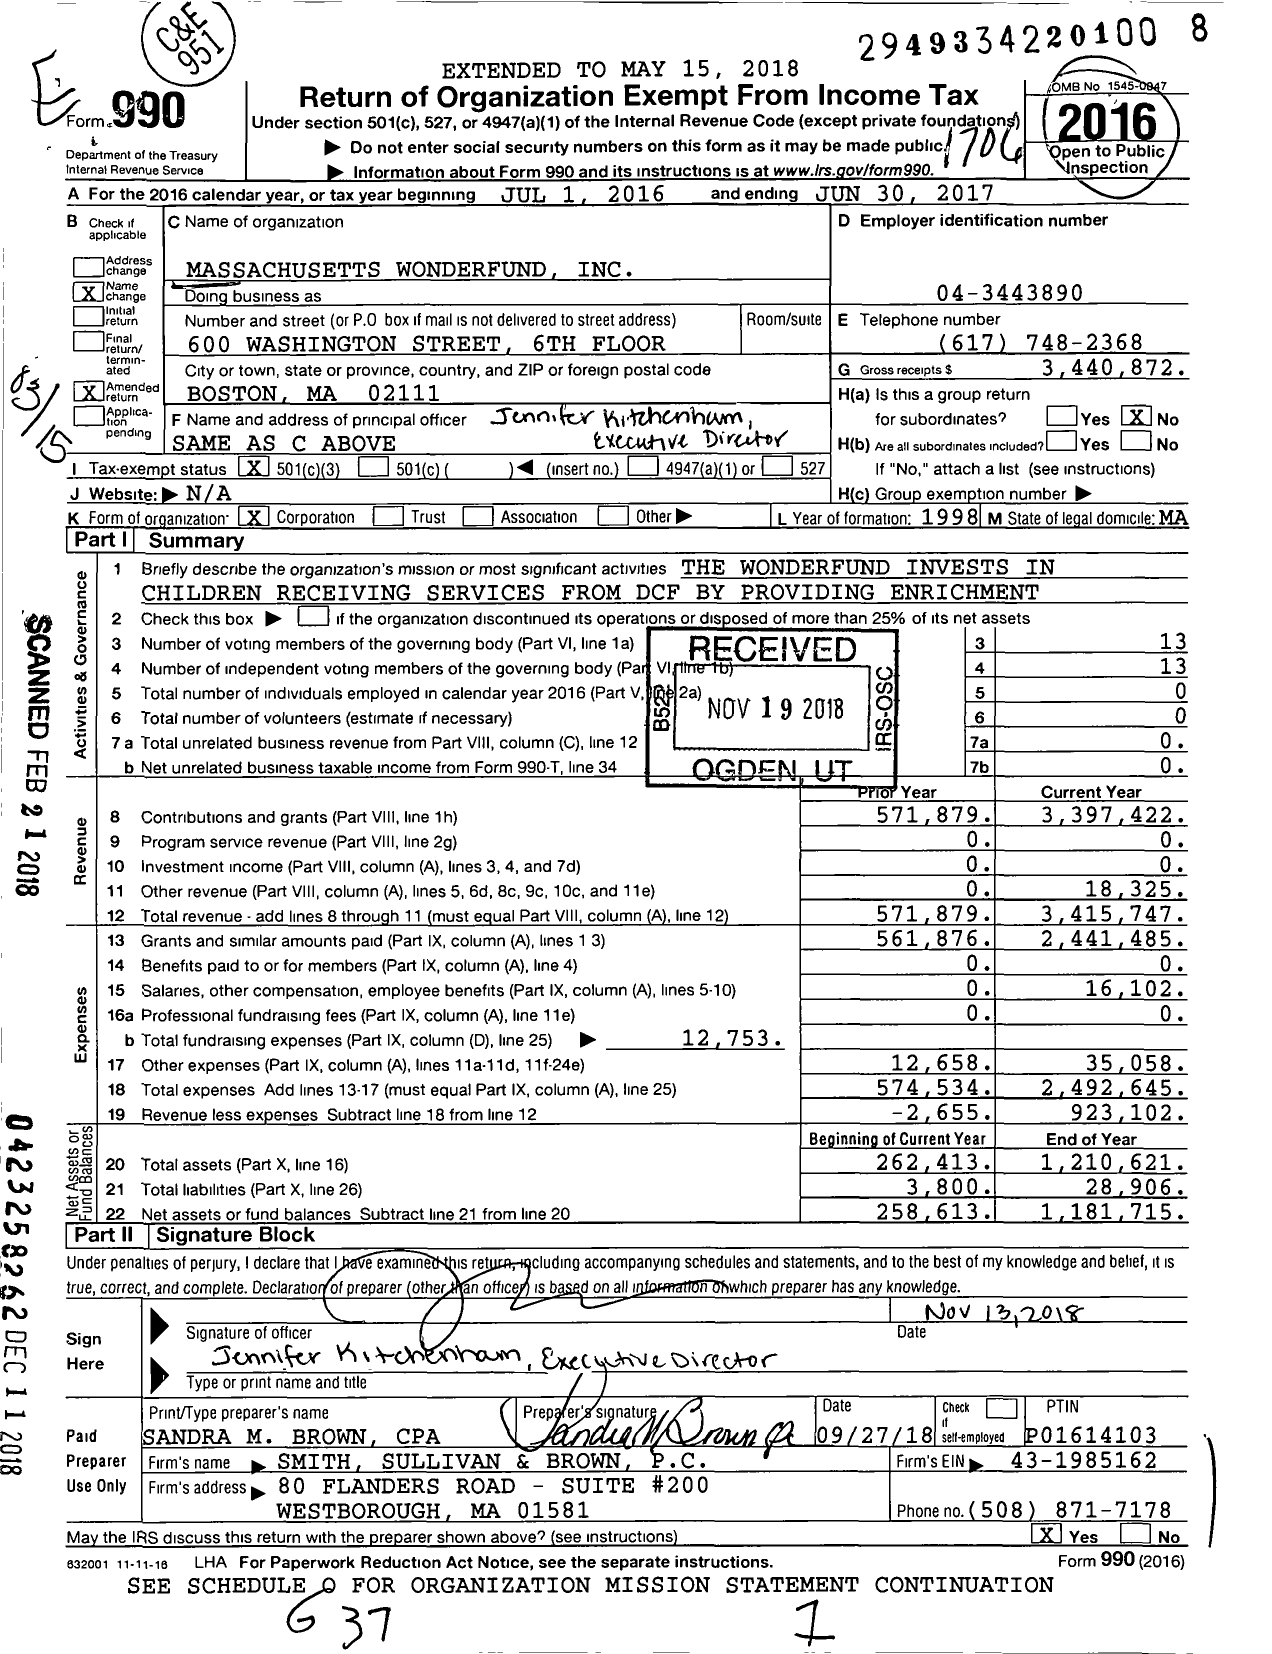 Image of first page of 2016 Form 990 for Massachusetts Wonderfund